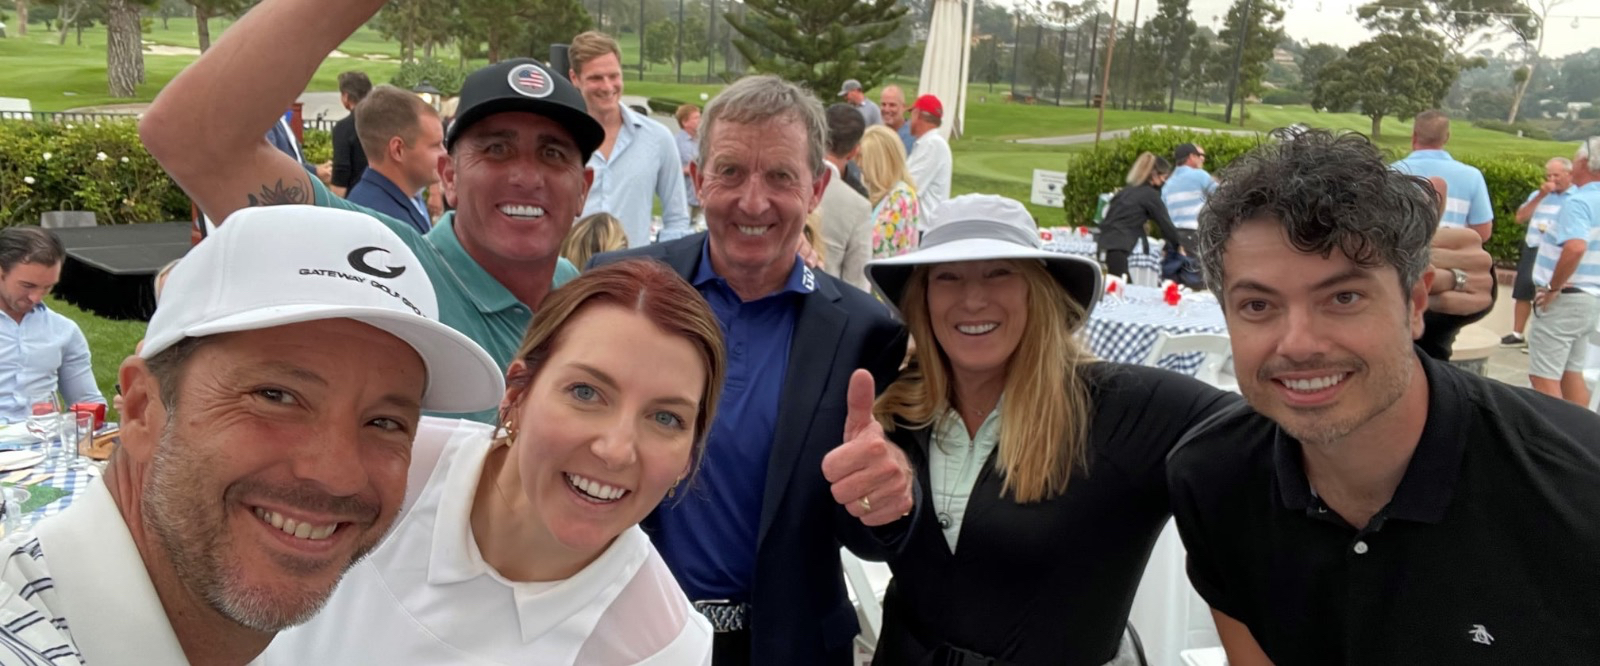 Group at golf event